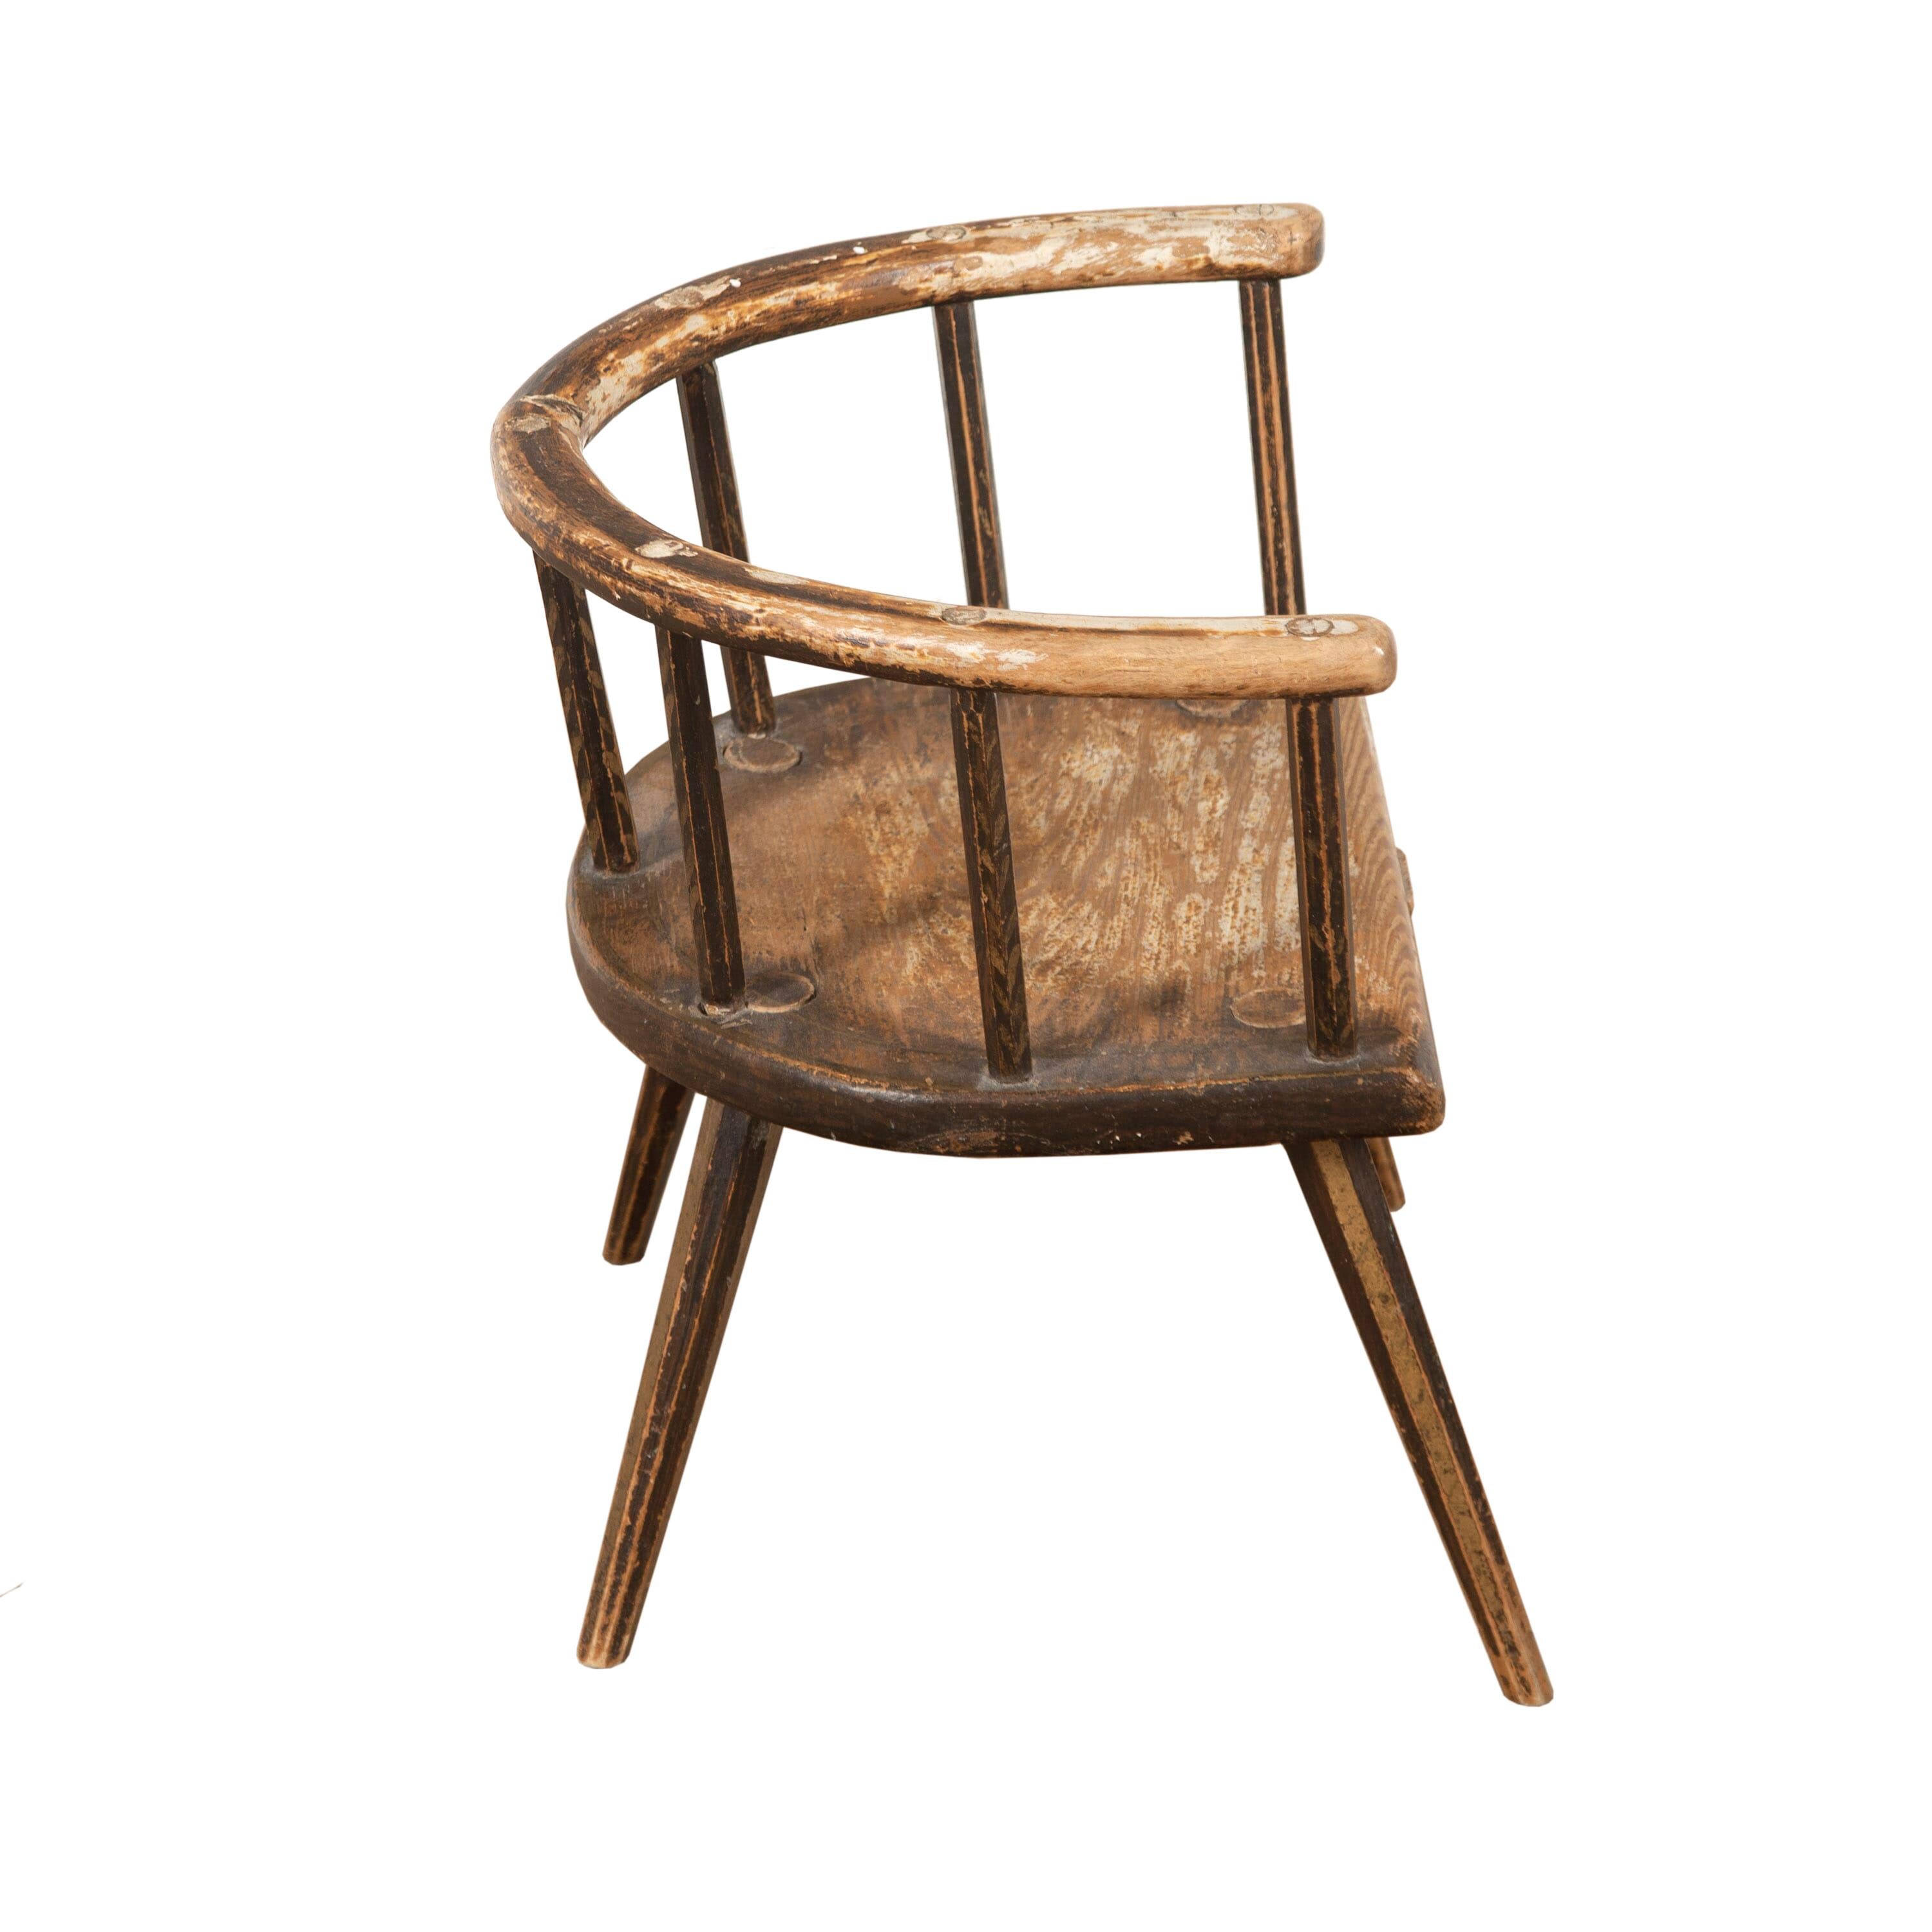 Swedish Stick Back Childs Chair In Good Condition For Sale In Tetbury, Gloucestershire